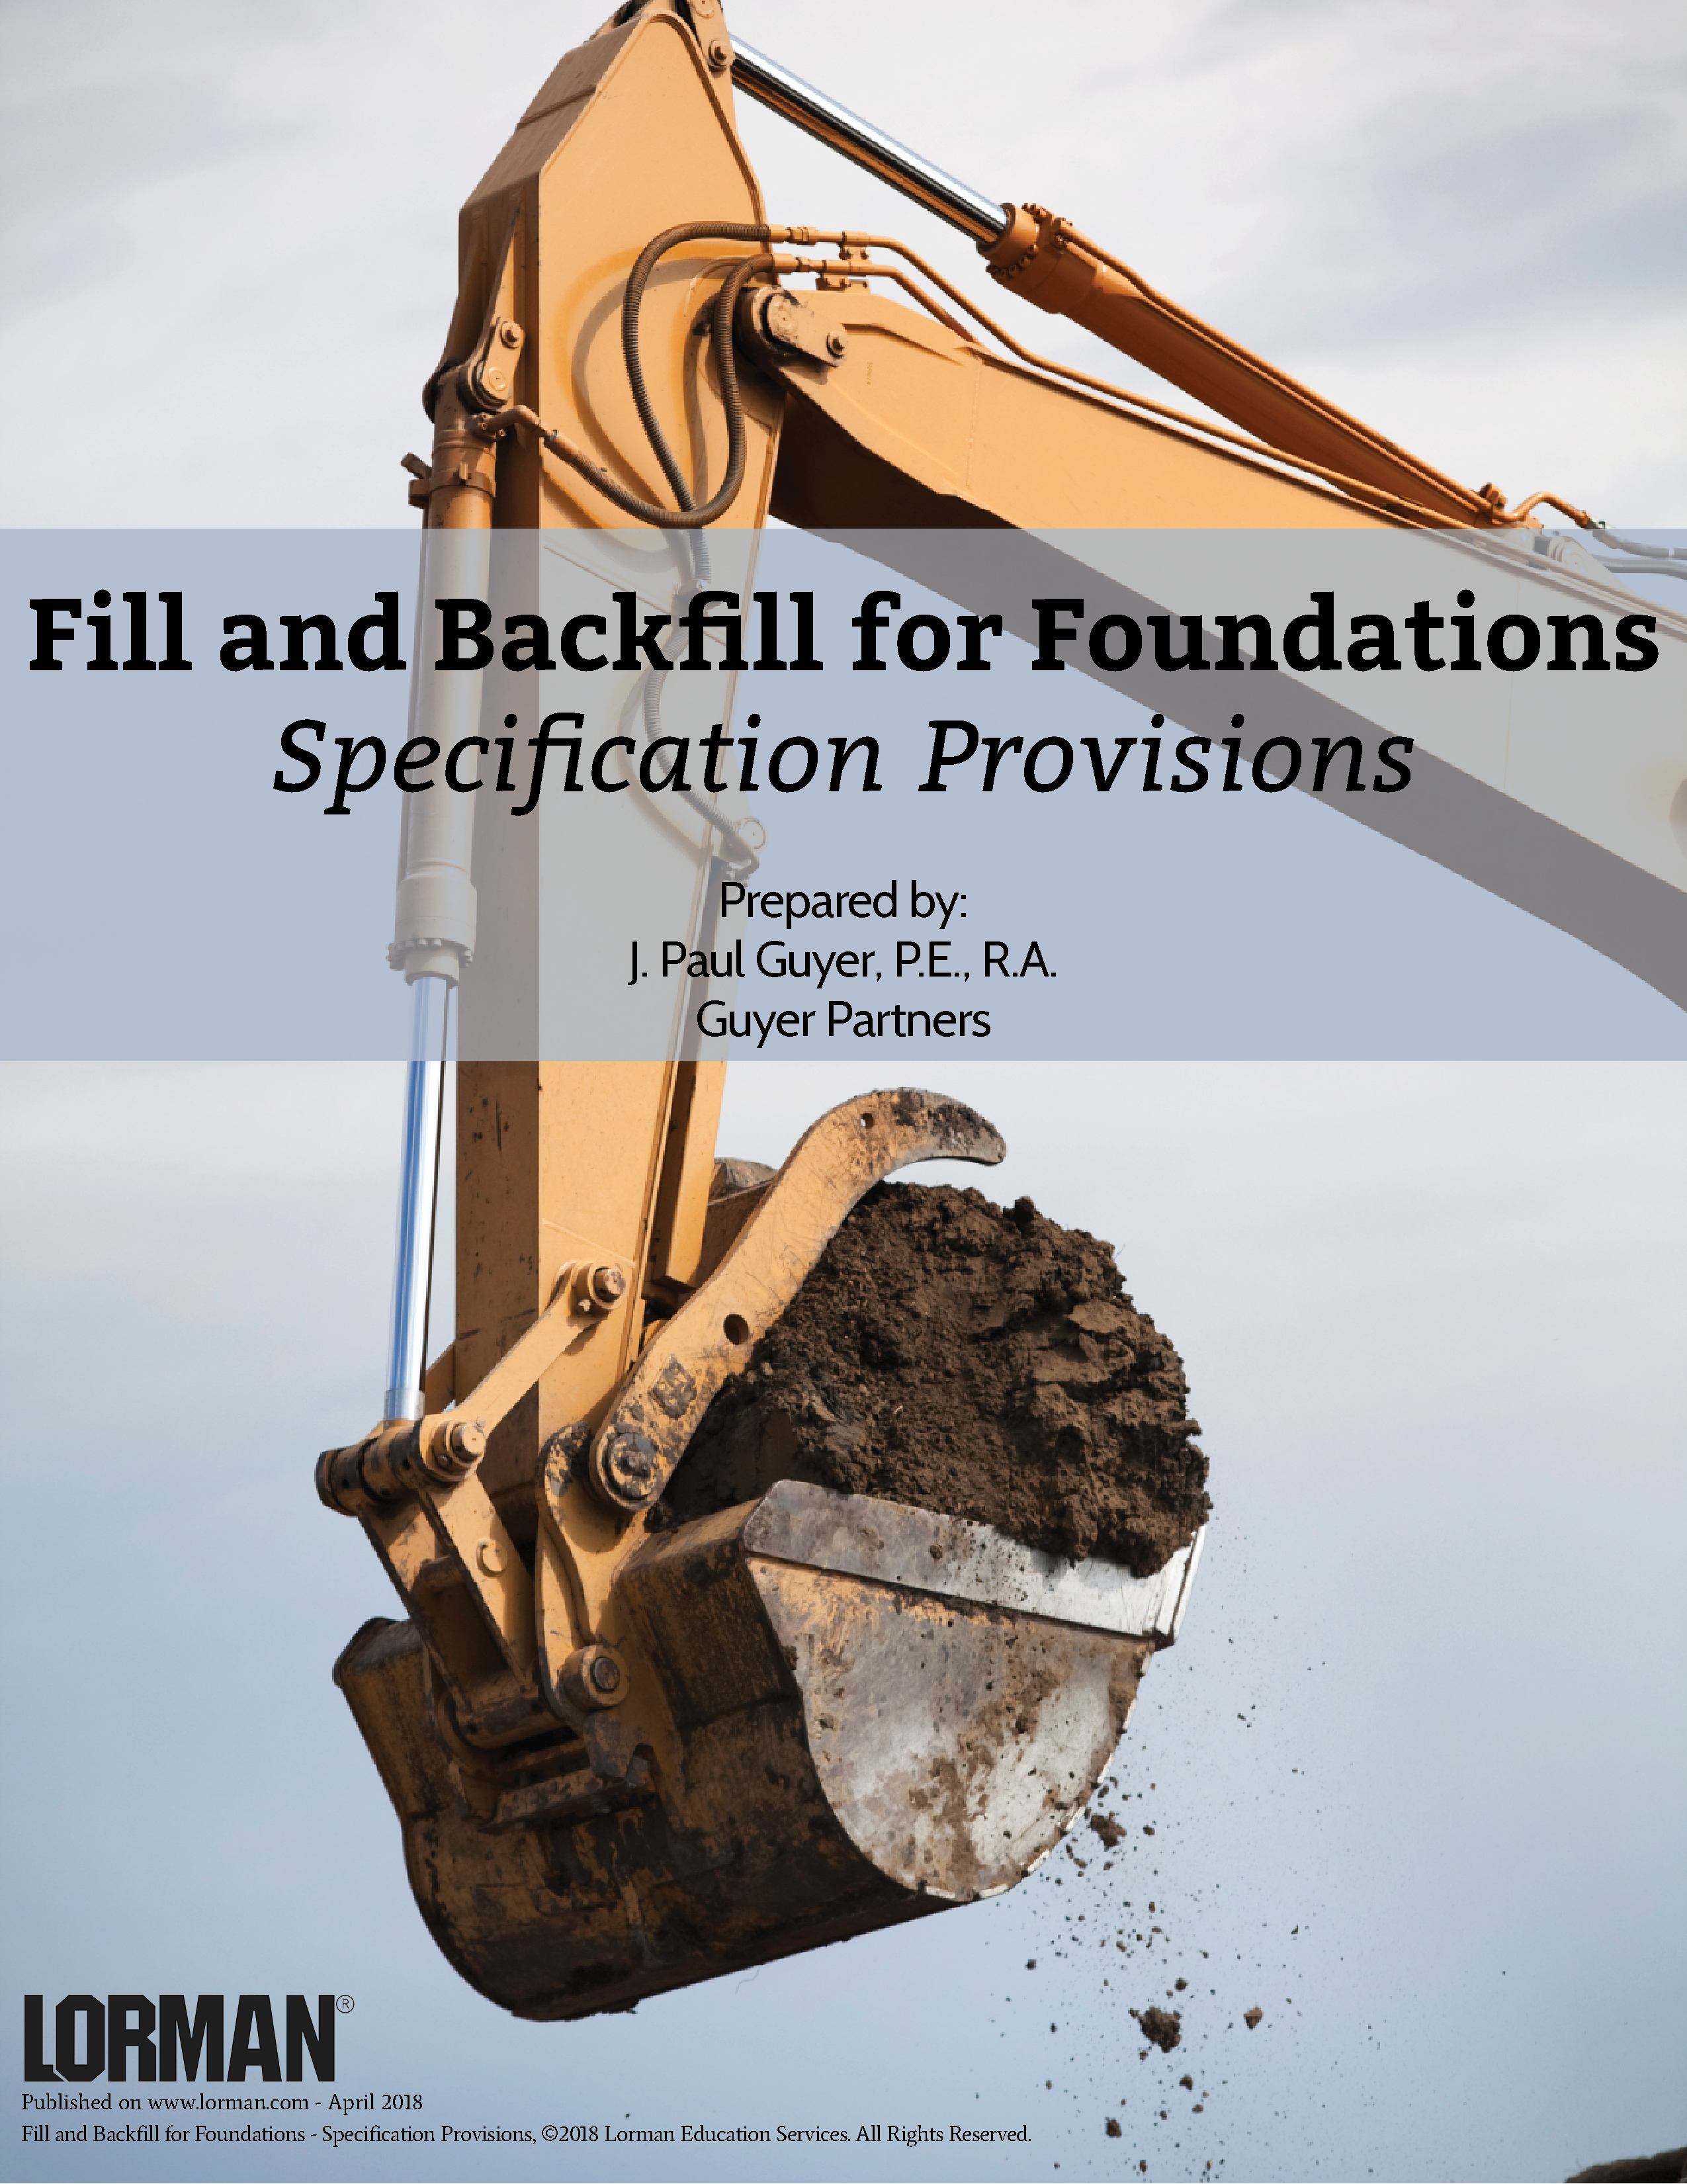 Fill and Backfill for Foundations - Specification Provisions